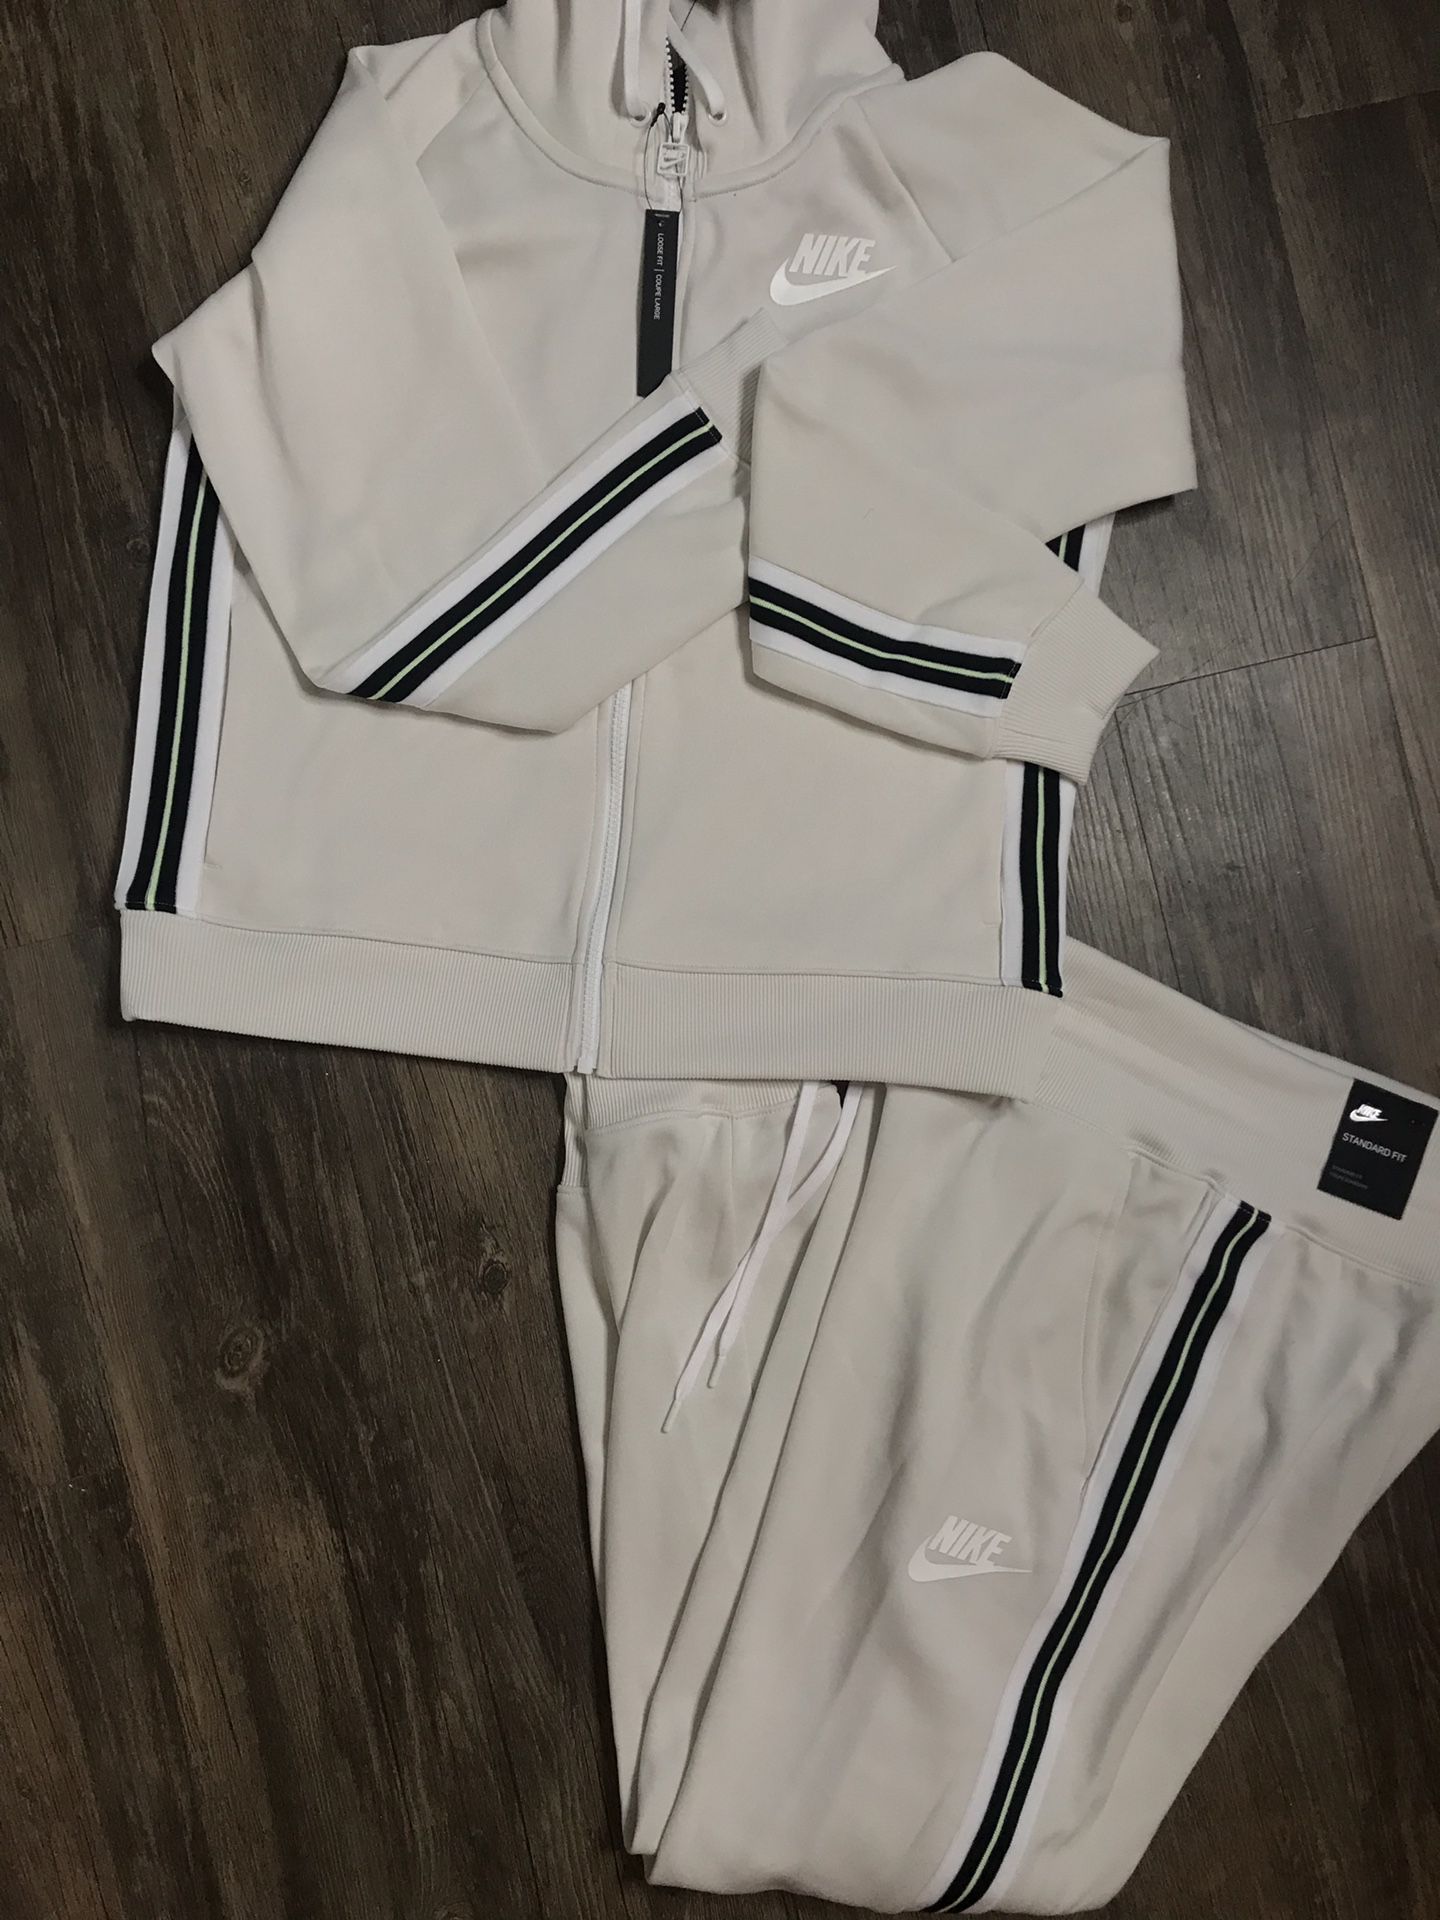 Nike Women’s track suit (Med.) for Sale in Houston, TX - OfferUp